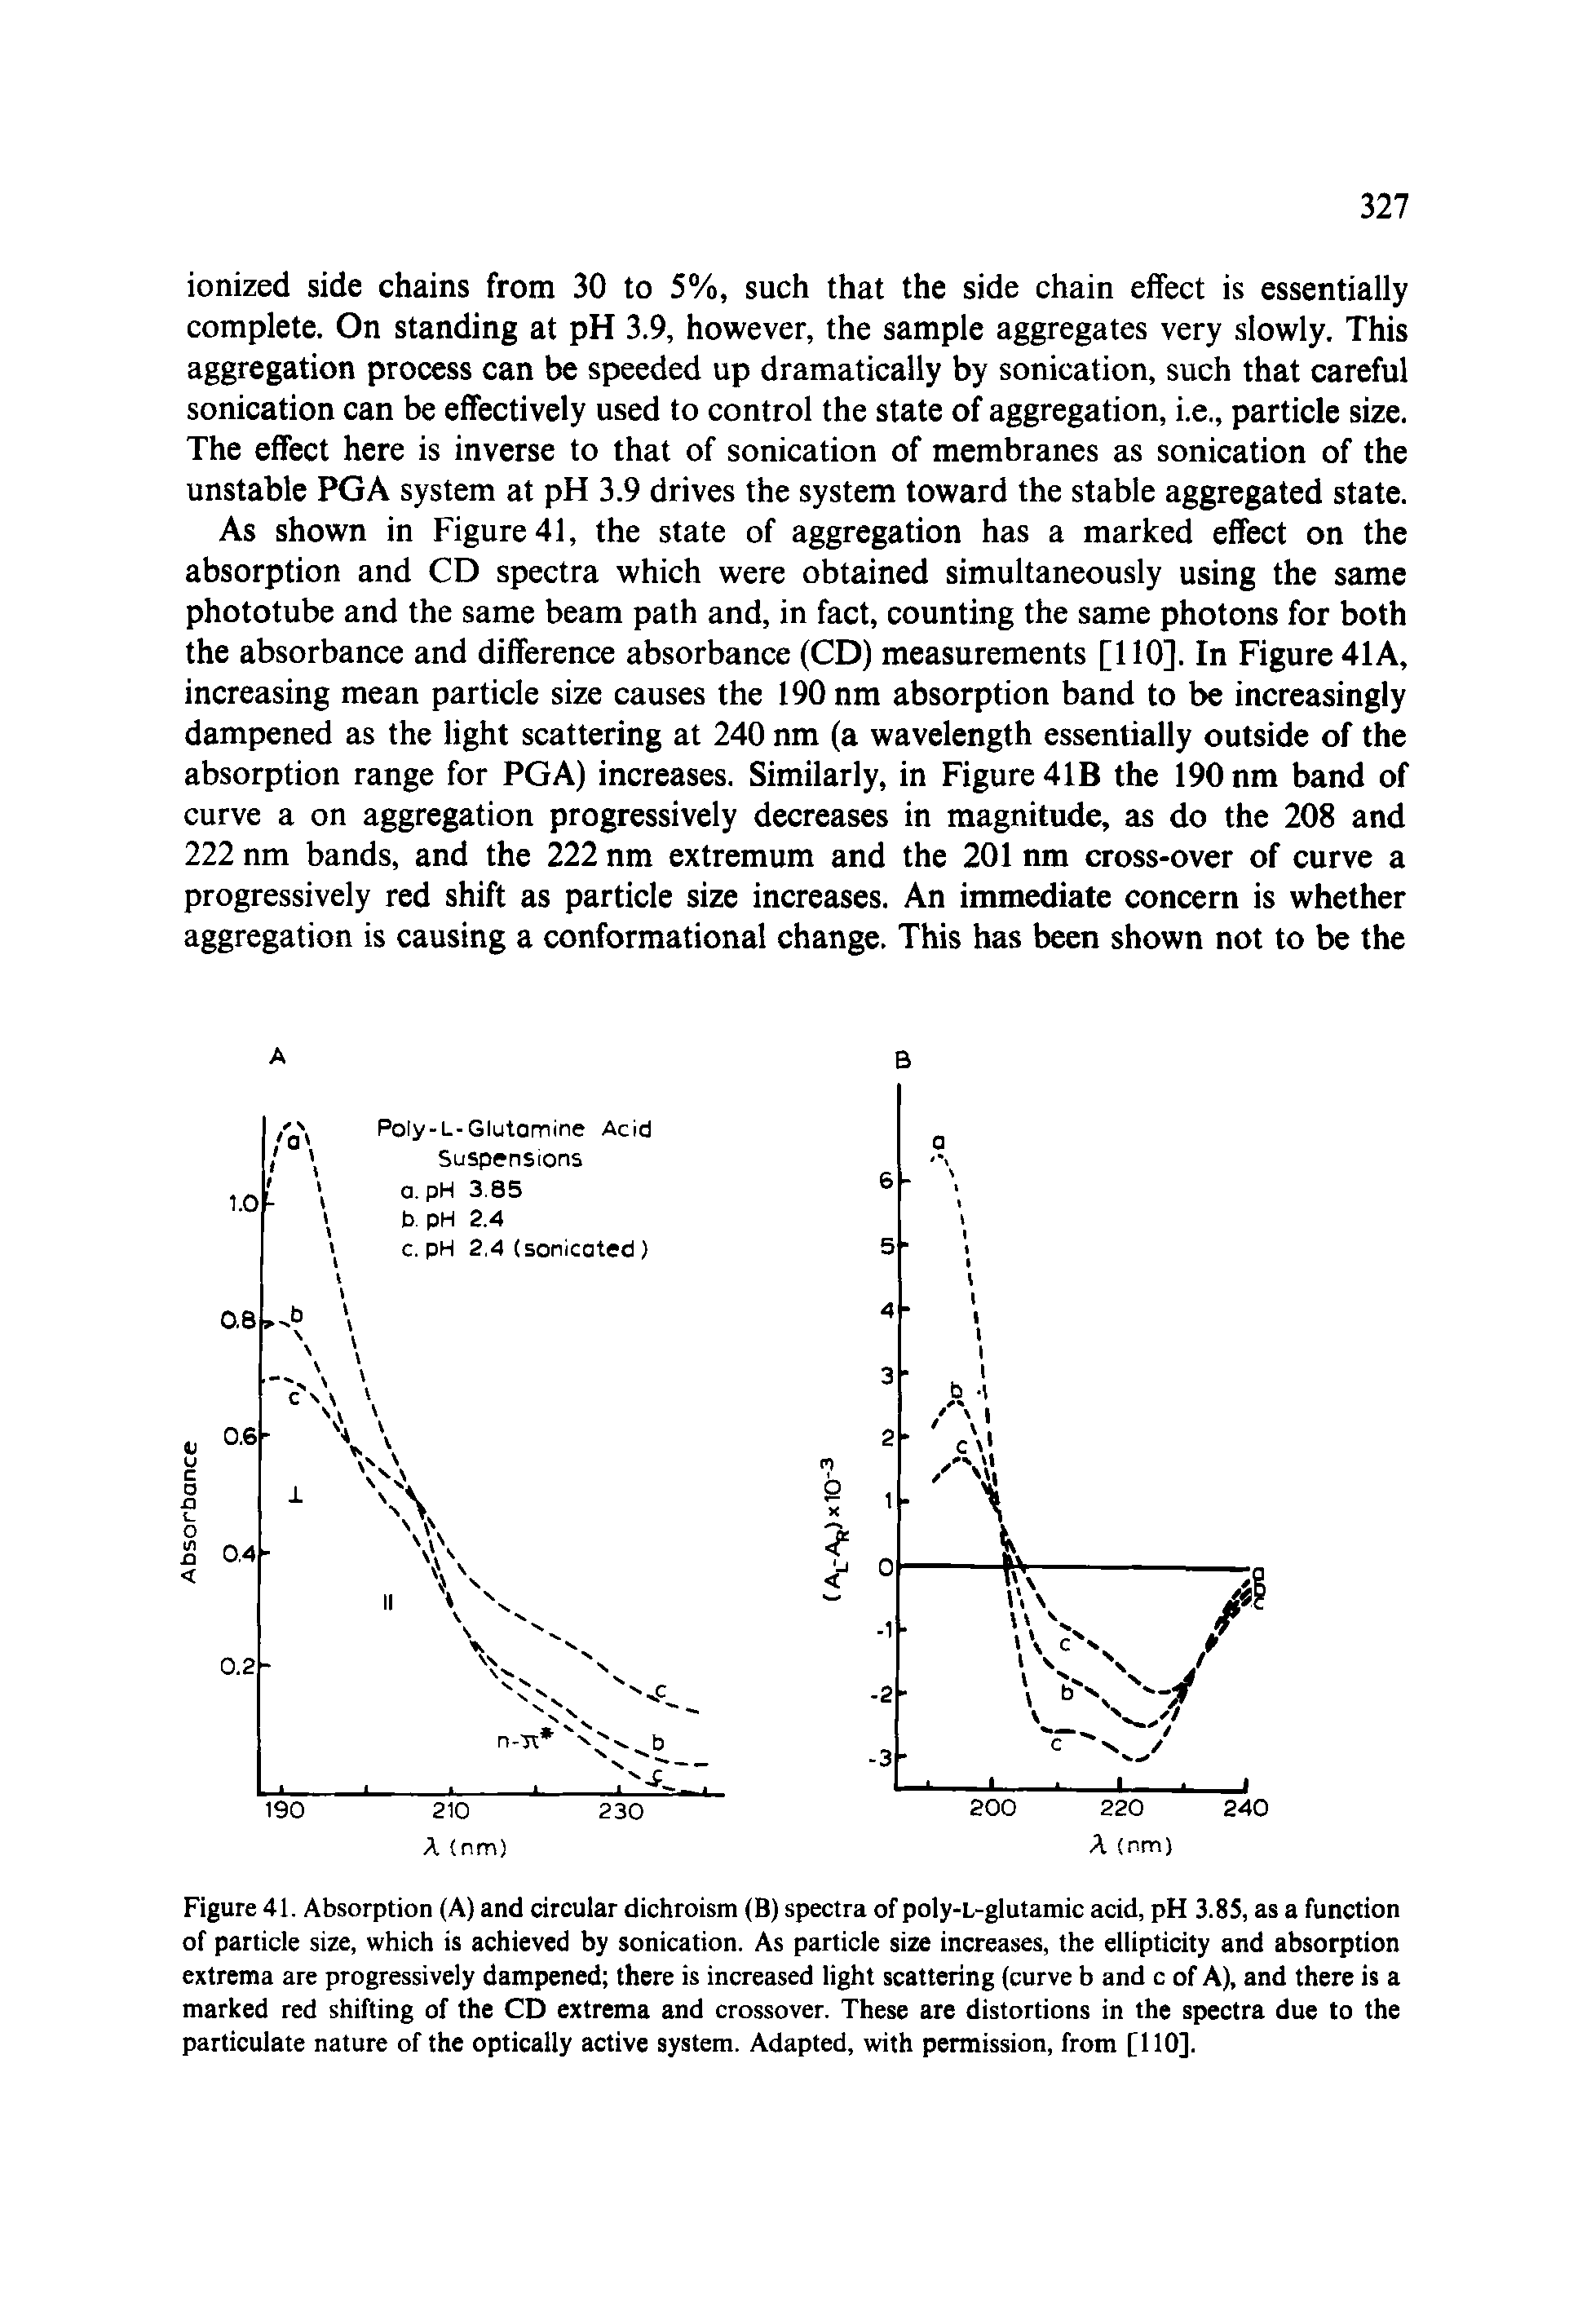 Figure 41. Absorption (A) and circular dichroism (B) spectra of poly-L-glutamic acid, pH 3.85, as a function of particle size, which is achieved by sonication. As particle size increases, the ellipticity and absorption extrema are progressively dampened there is increased light scattering (curve b and c of A), and there is a marked red shifting of the CD extrema and crossover. These are distortions in the spectra due to the particulate nature of the optically active system. Adapted, with permission, from [110].